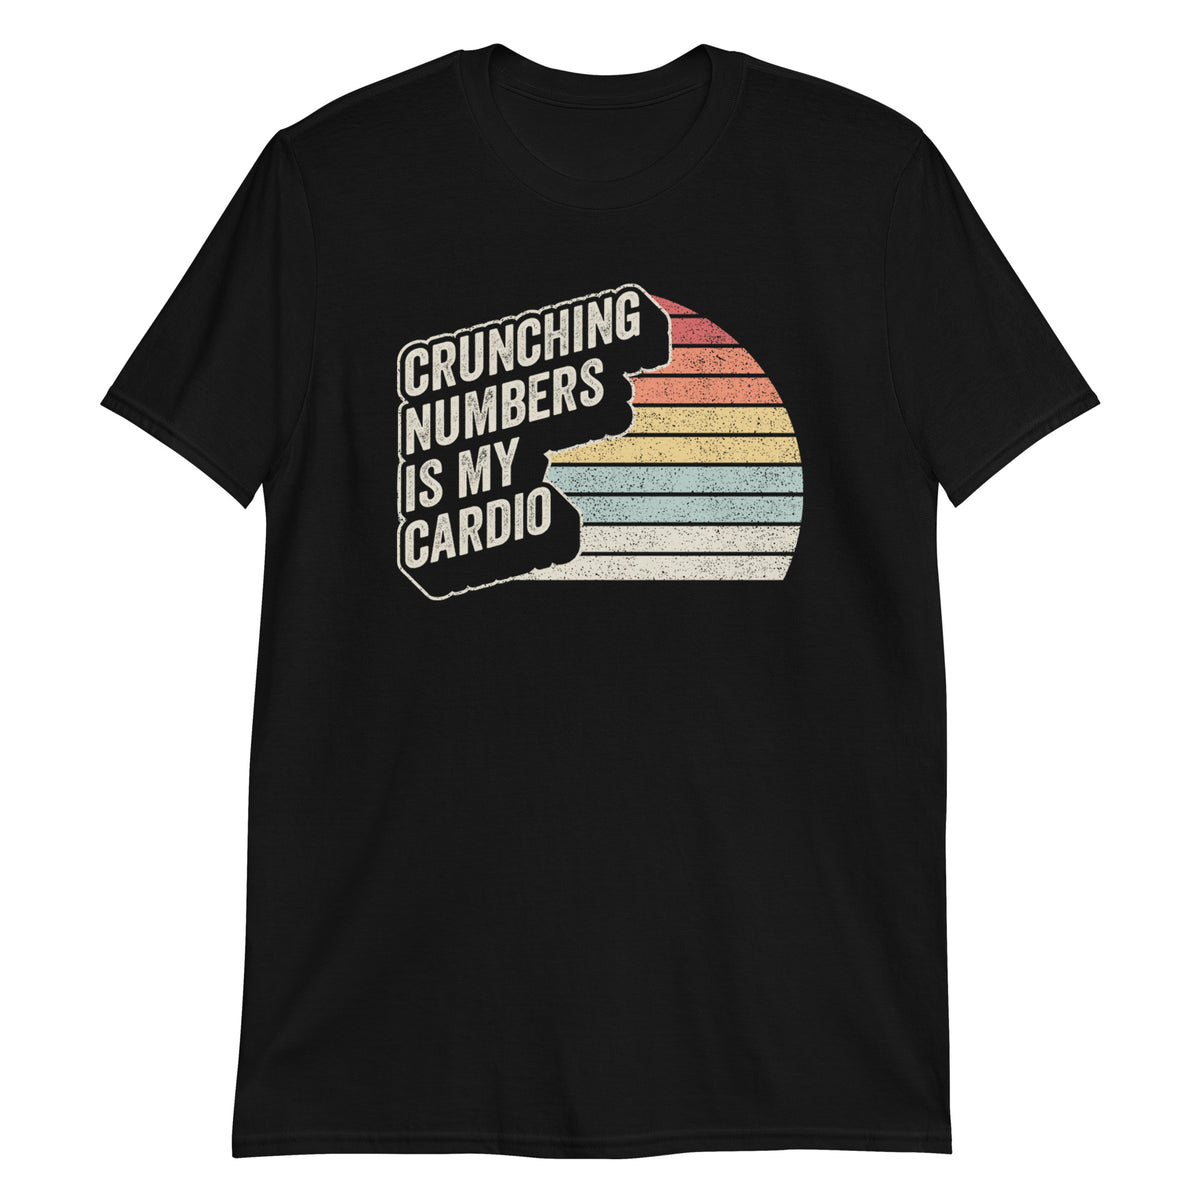 Crunching Numbers is My Cardio T-Shirt